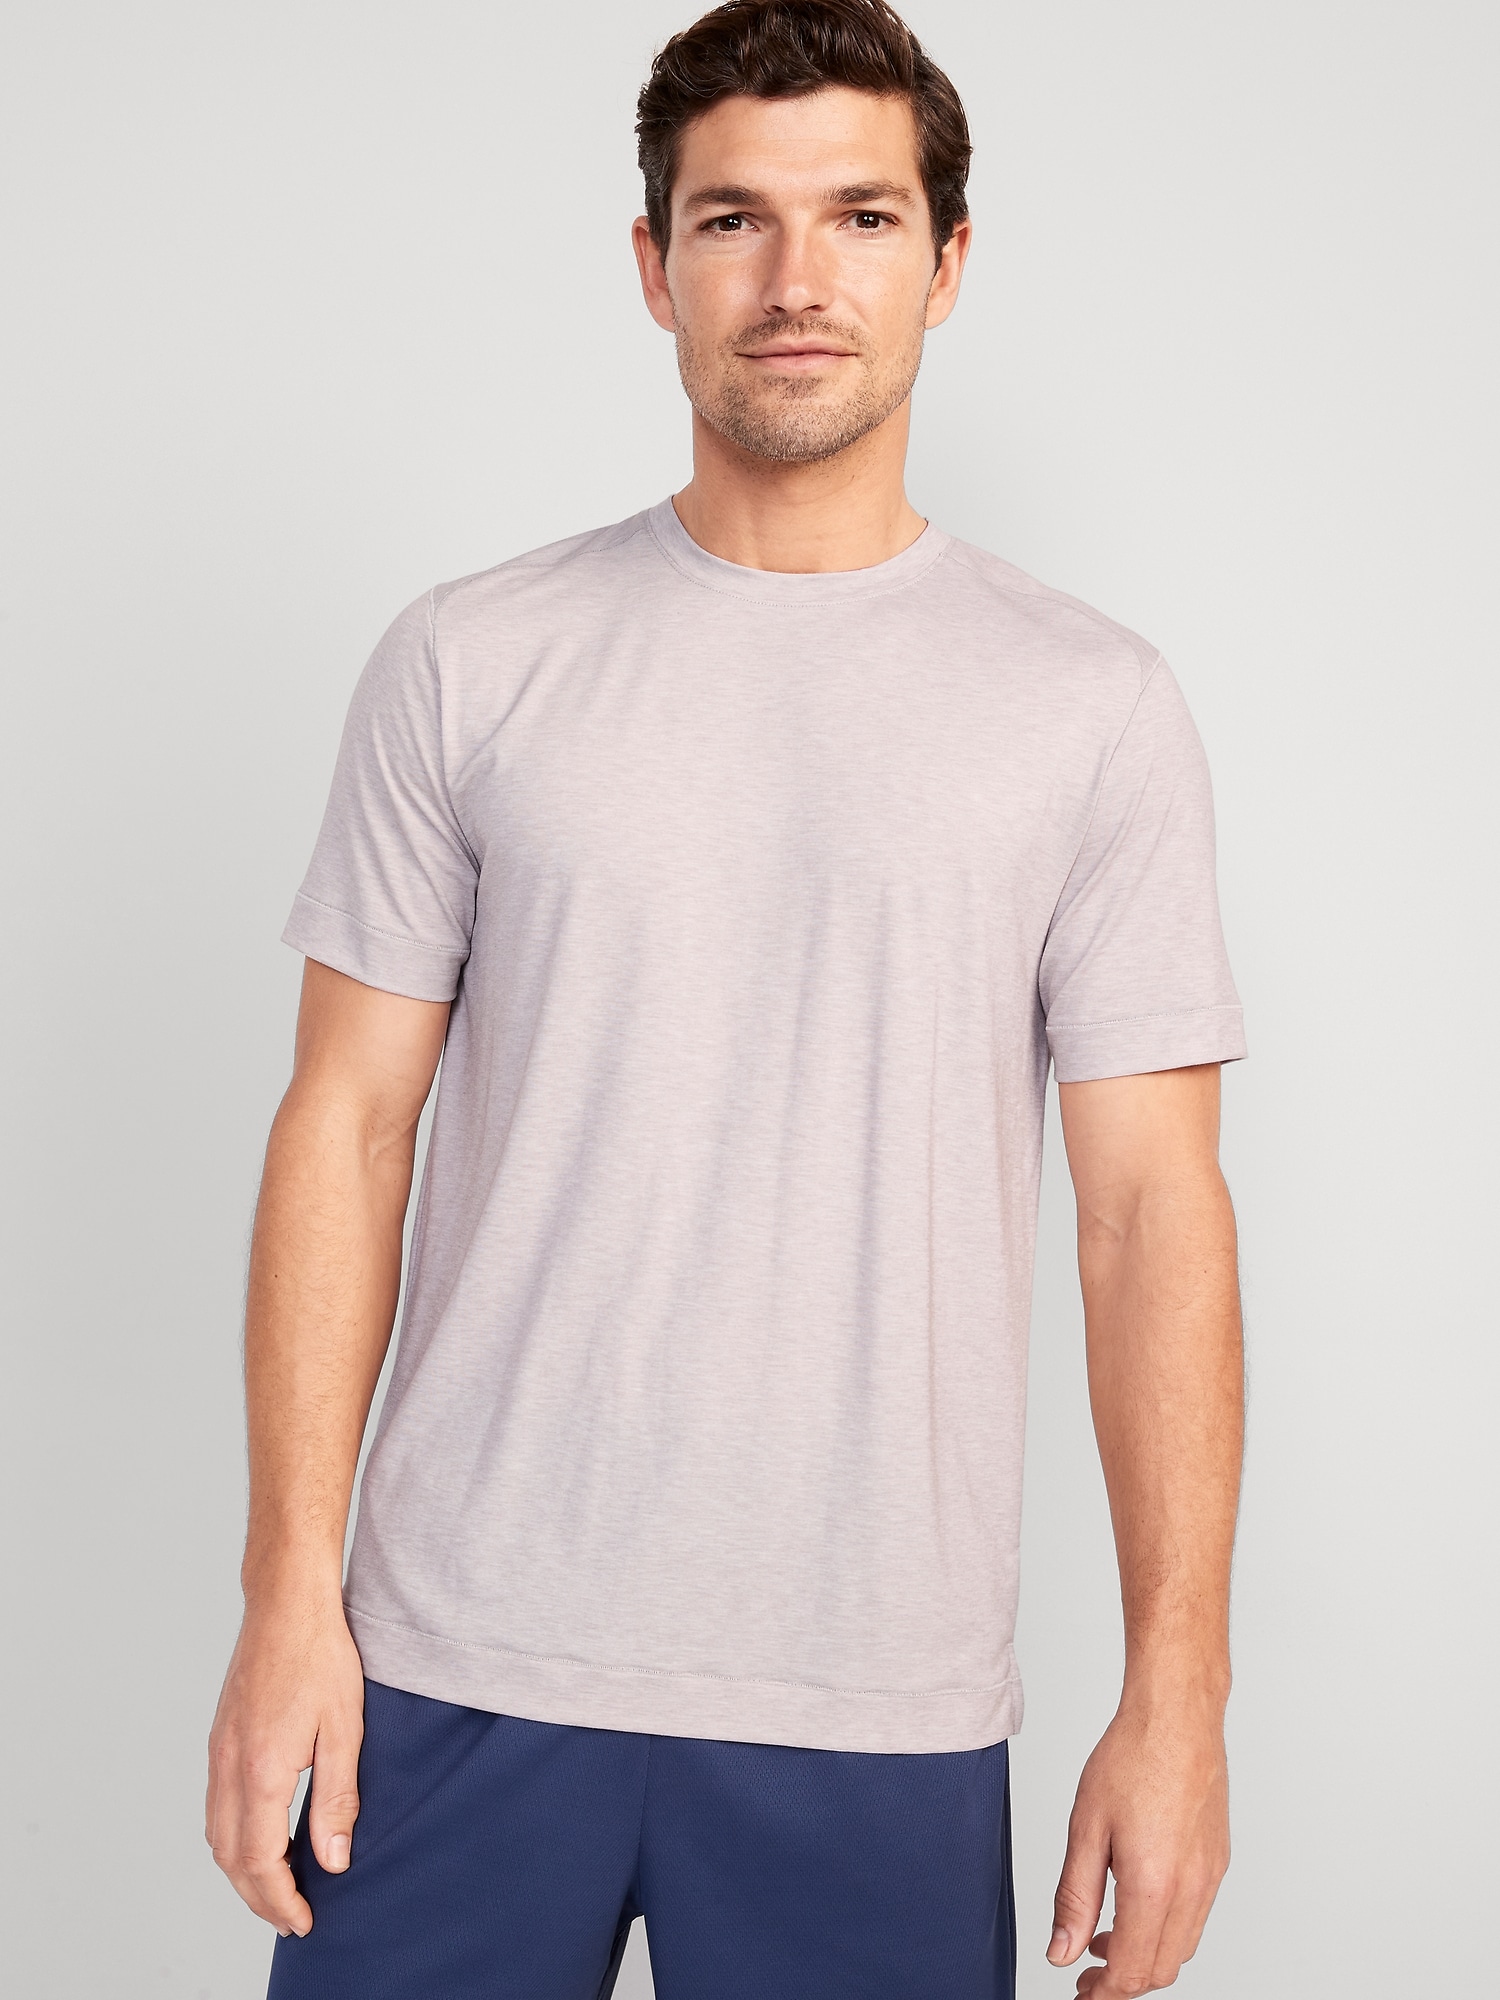 Old Navy Beyond 4-Way Stretch T-Shirt for Men gray. 1